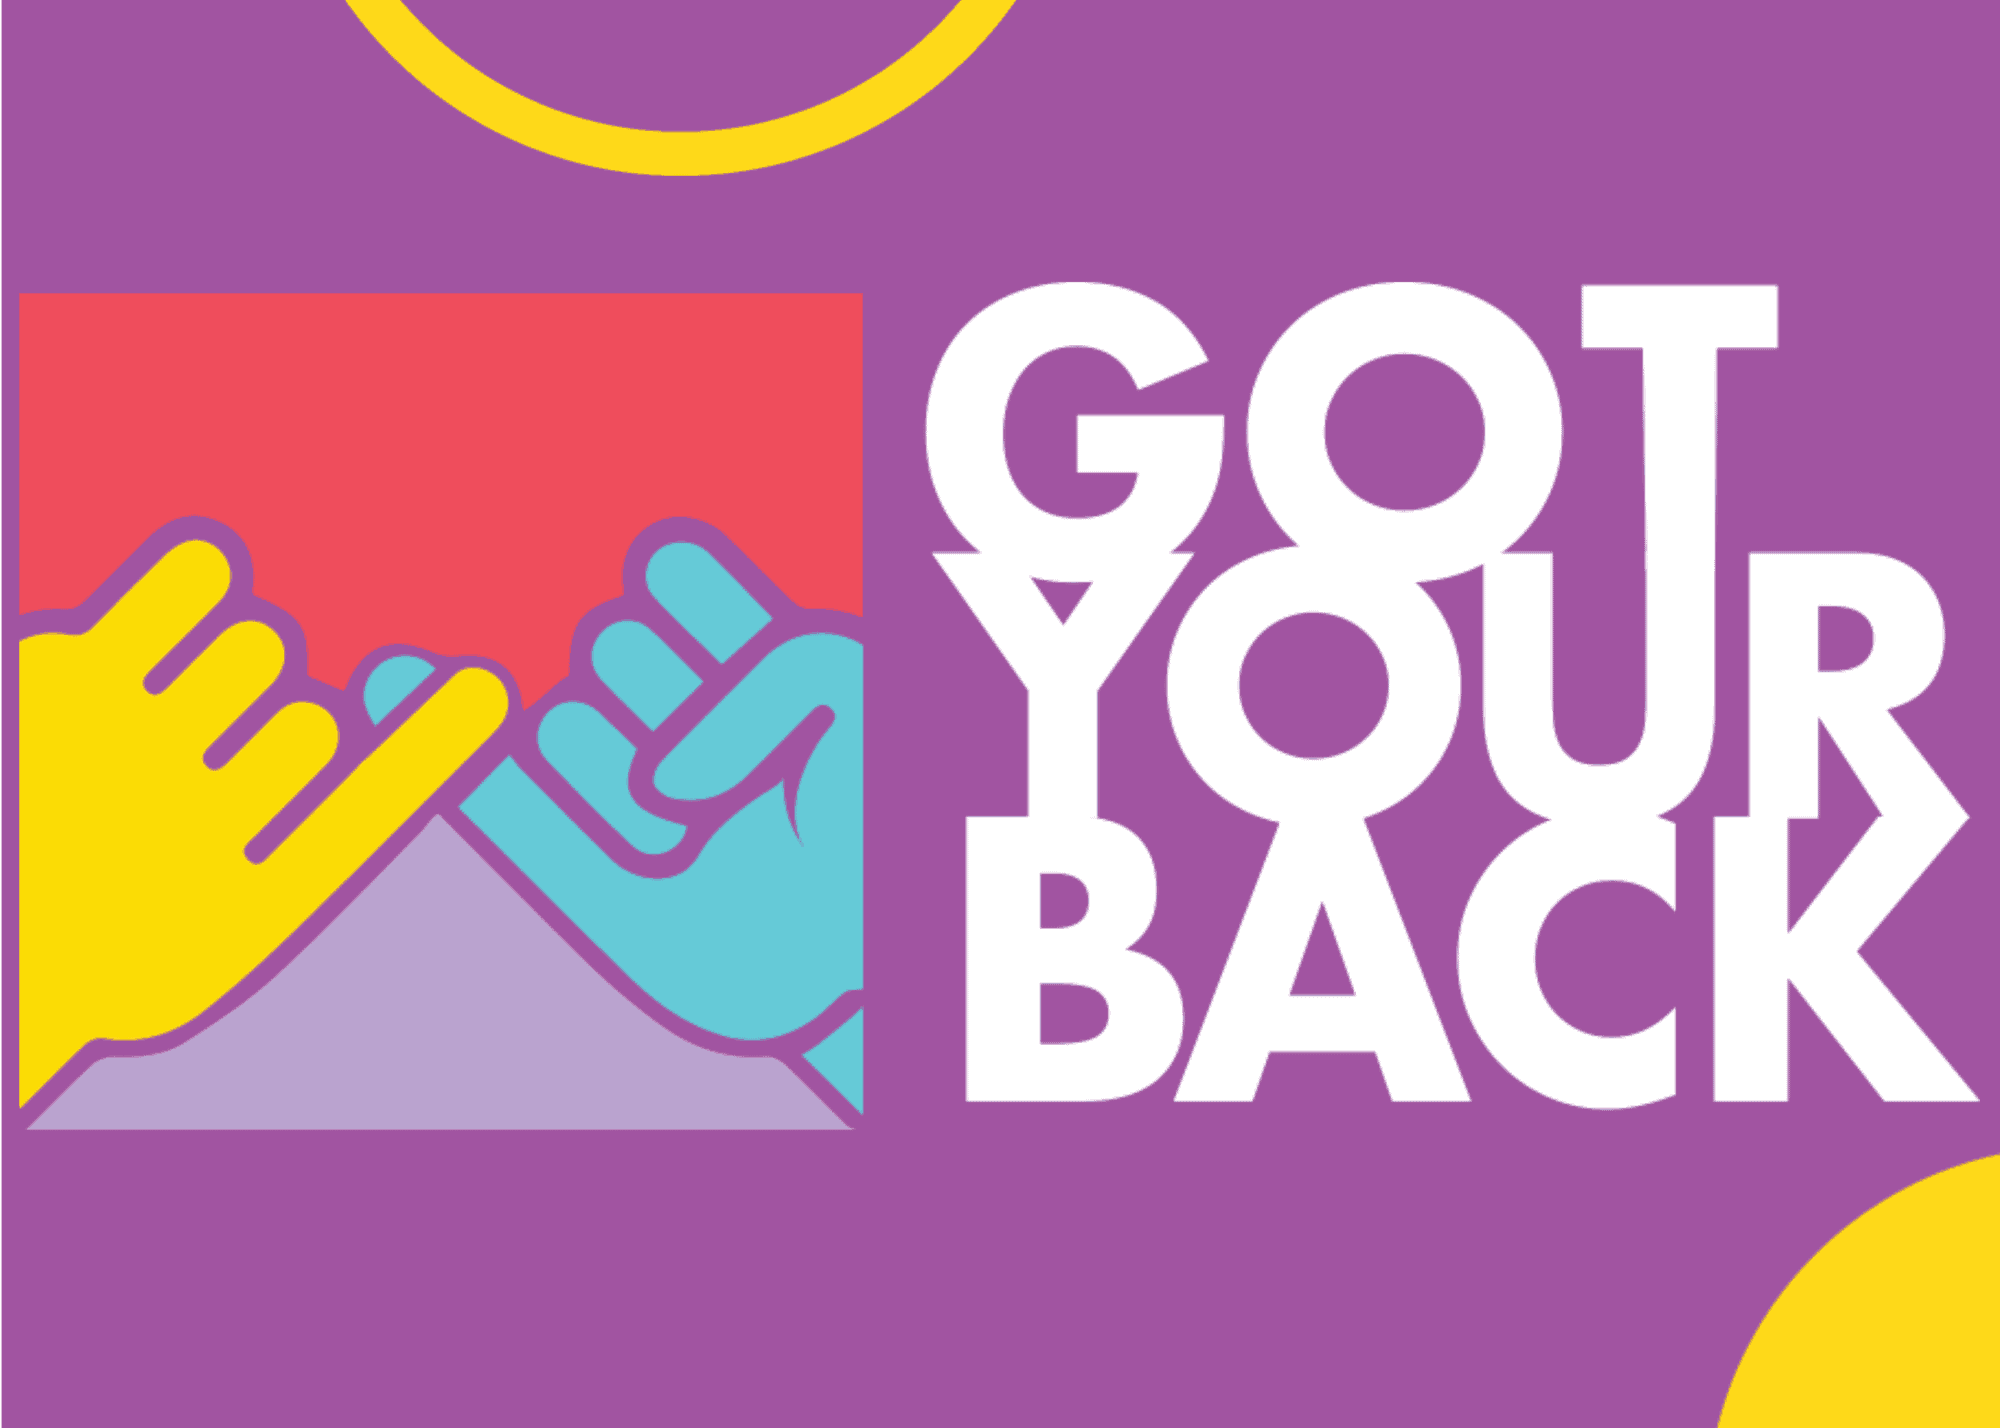 Colourful logo that says Got Your Back